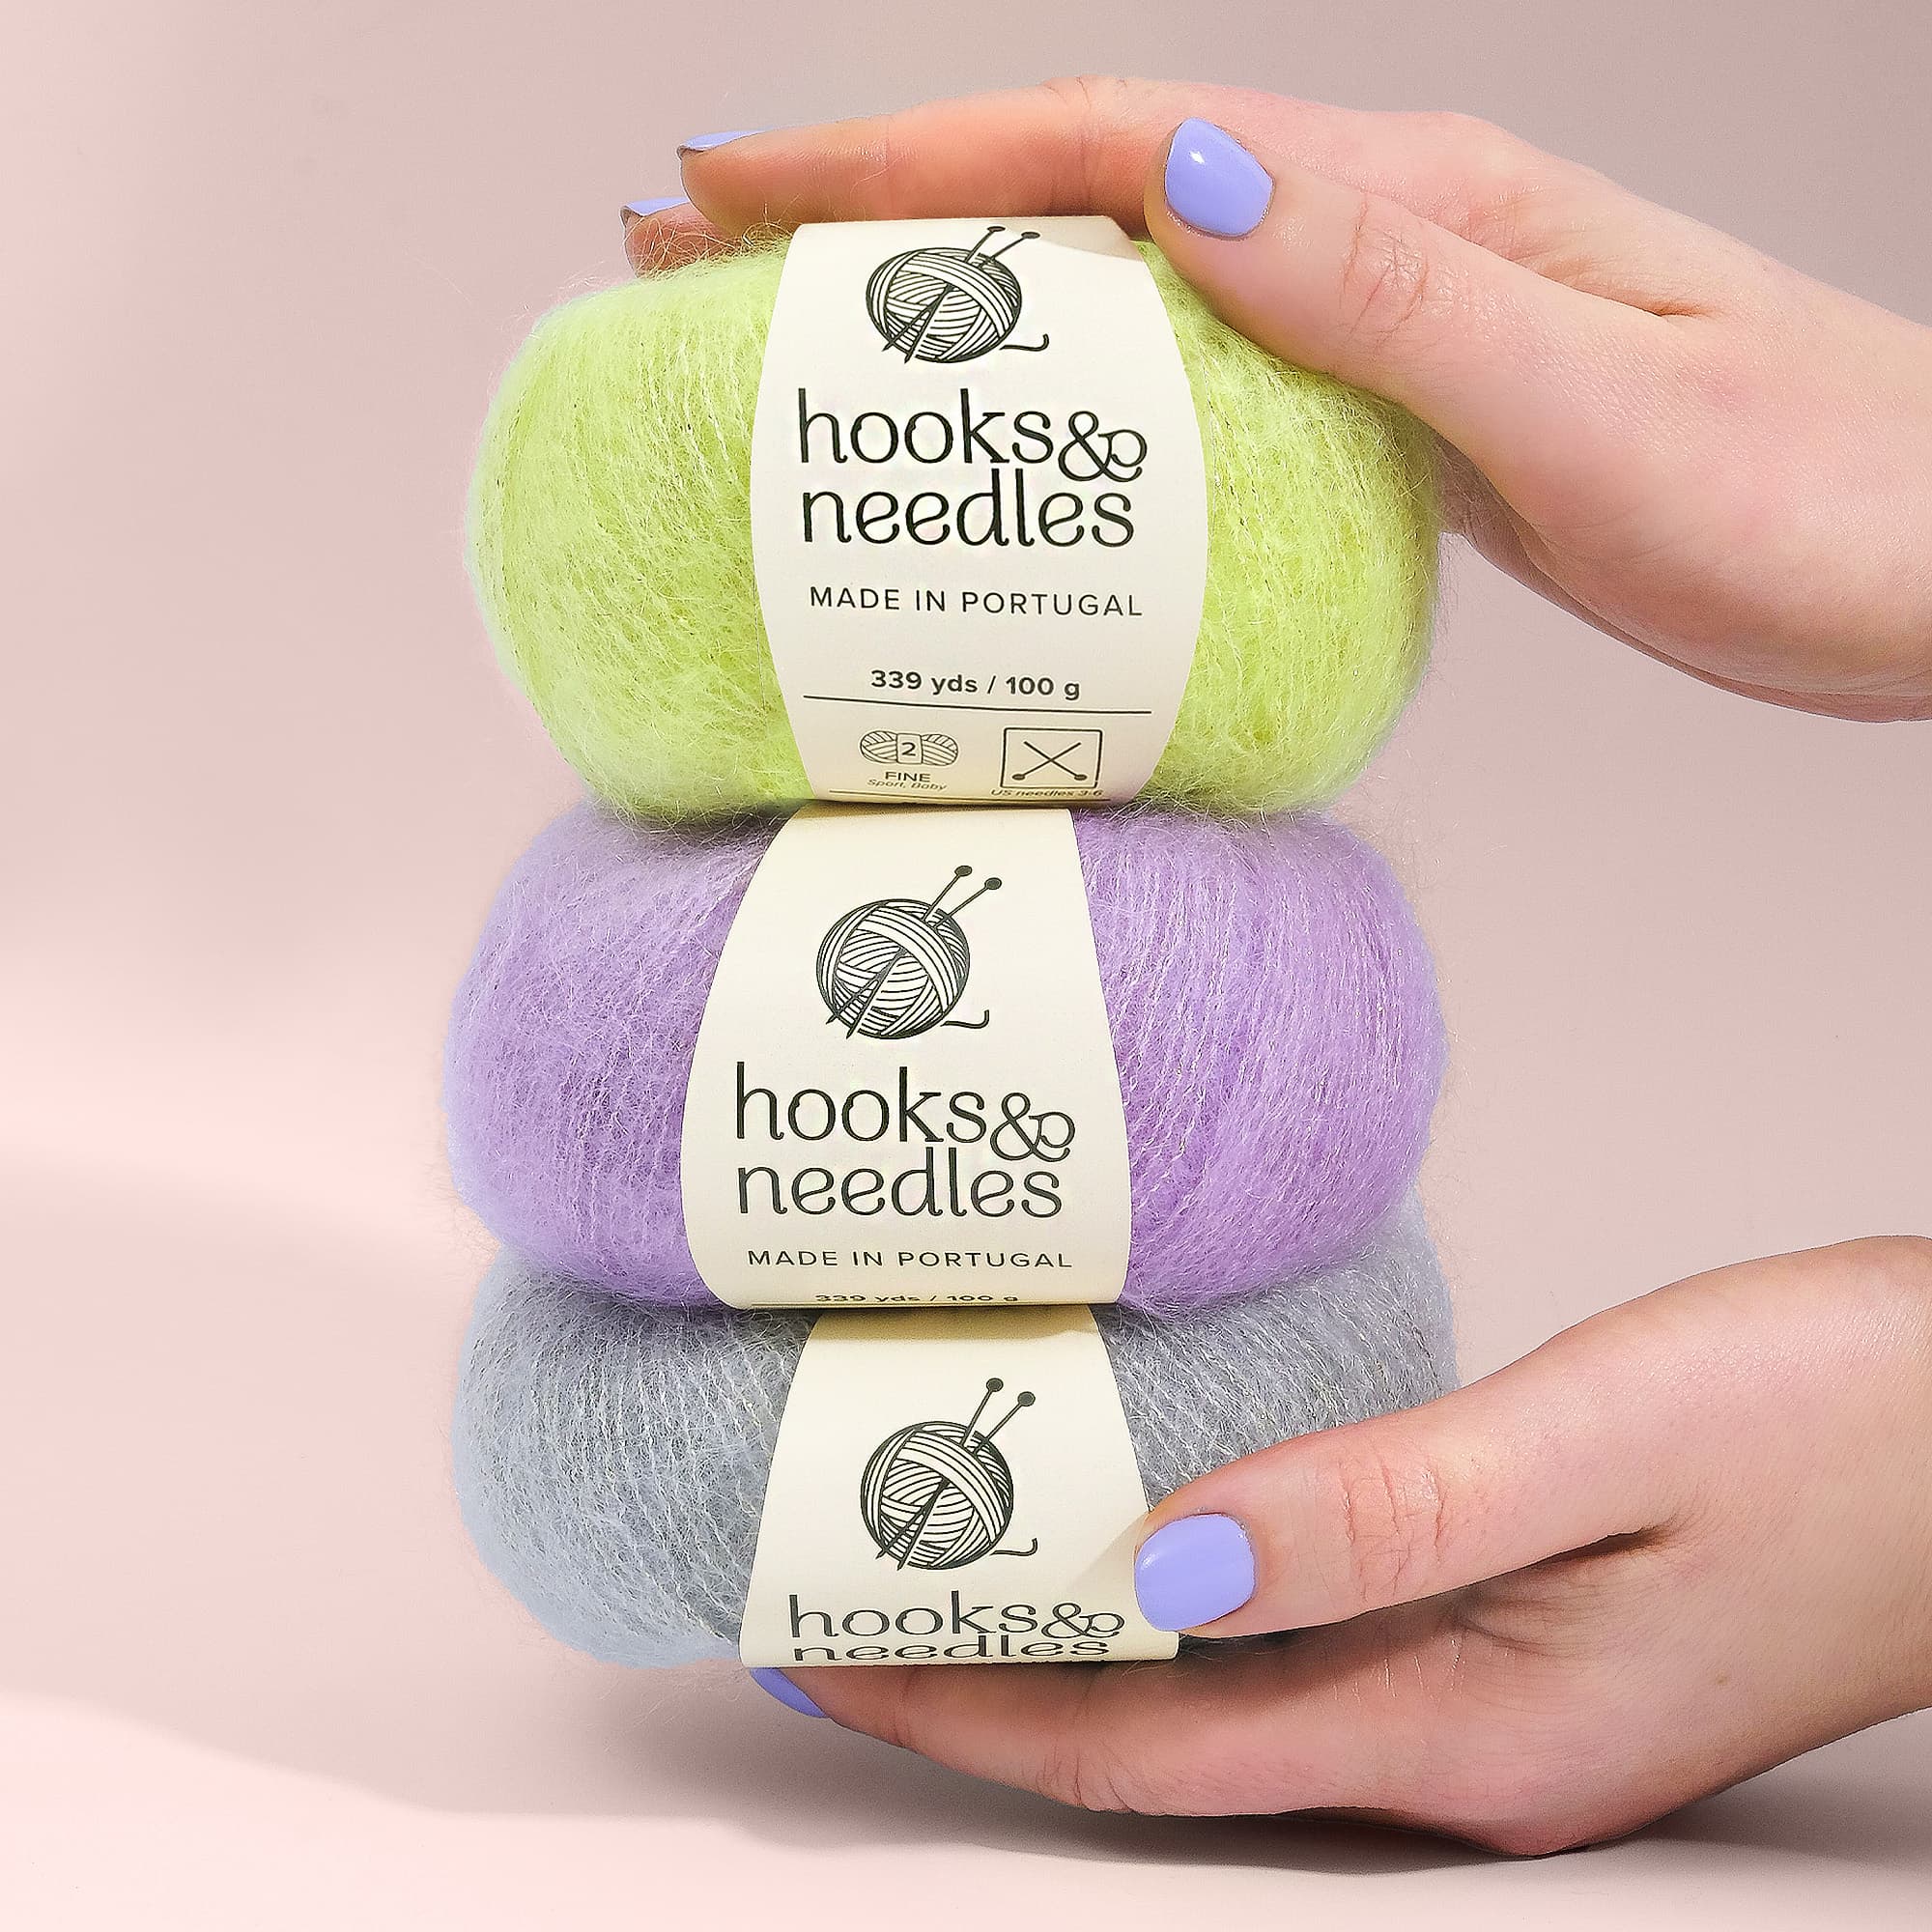 Hands holding three stacked yarn balls in green, purple, and gray, labeled "Hooks & Needles Discovery Box" against a soft pink background.